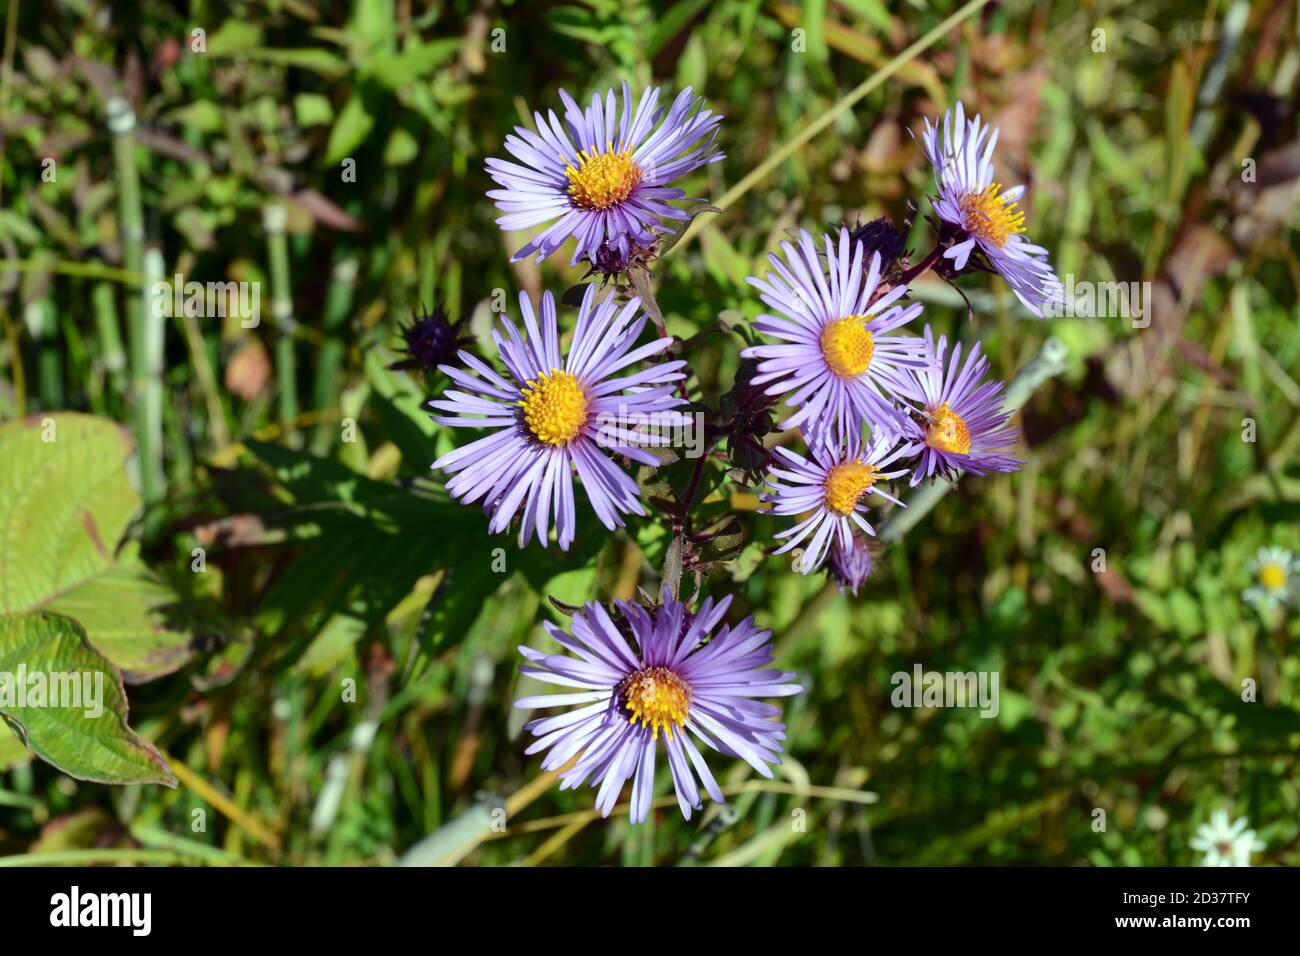 Purple New England Aster flowers, or Symphyotrichum novae-angliae, growing in a forest clearing in Algonquin Provincial Park, Ontario, Canada. Stock Photo